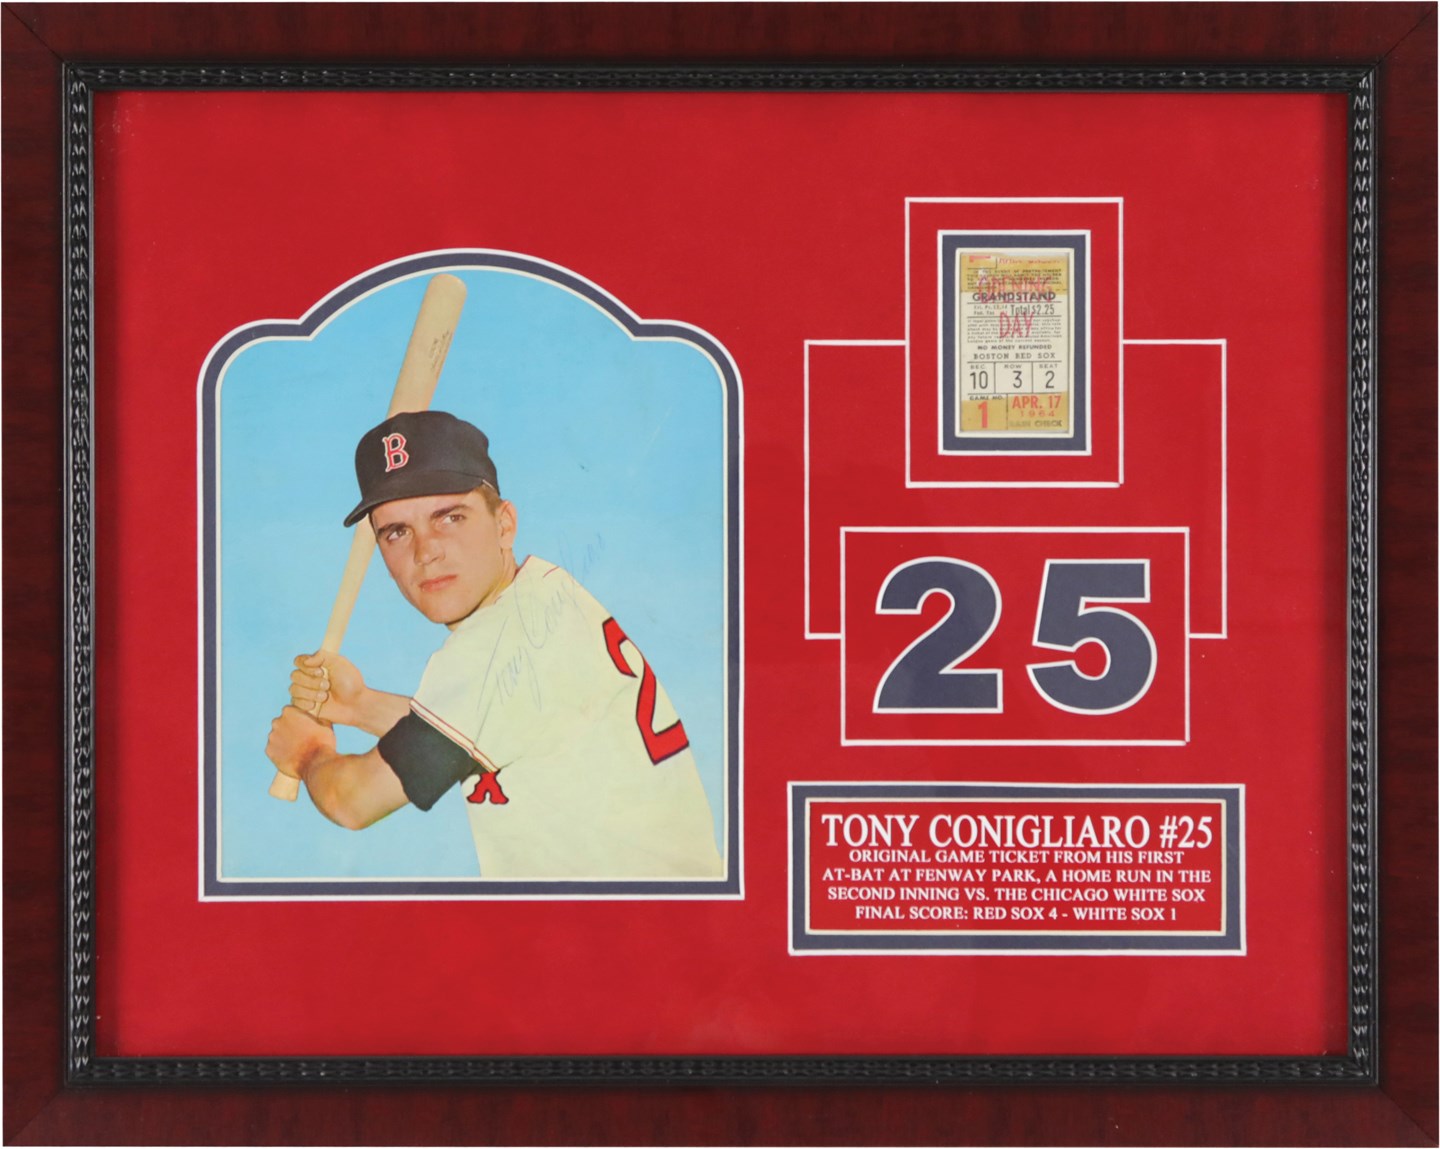 Tickets, Publications & Pins - Tony Conigliaro Fenway Park Debut & 1st Home Run Ticket Stub with Signed Photo Display (PSA)